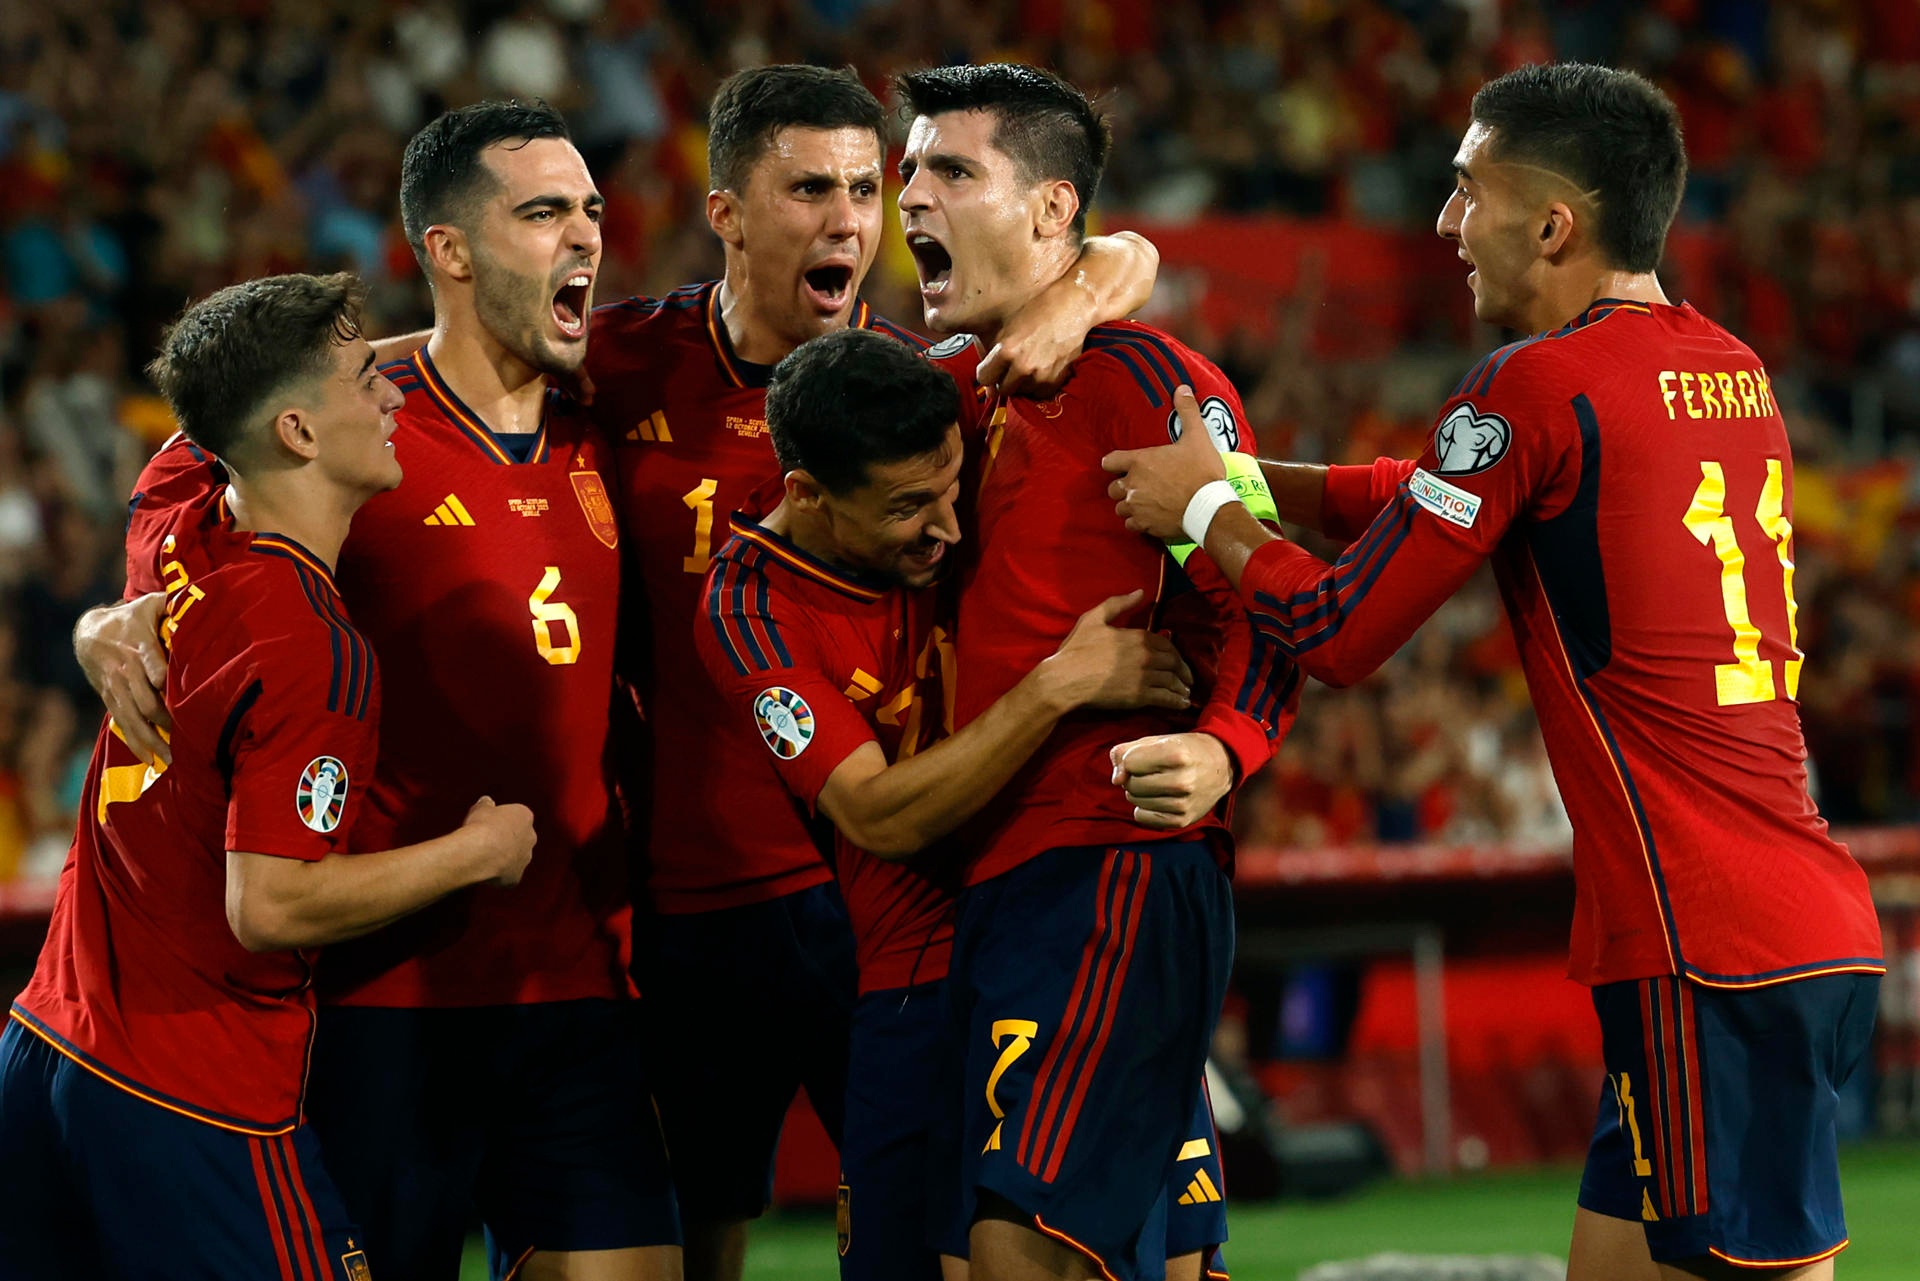 Spain to face Andorra in the build-up to the EURO